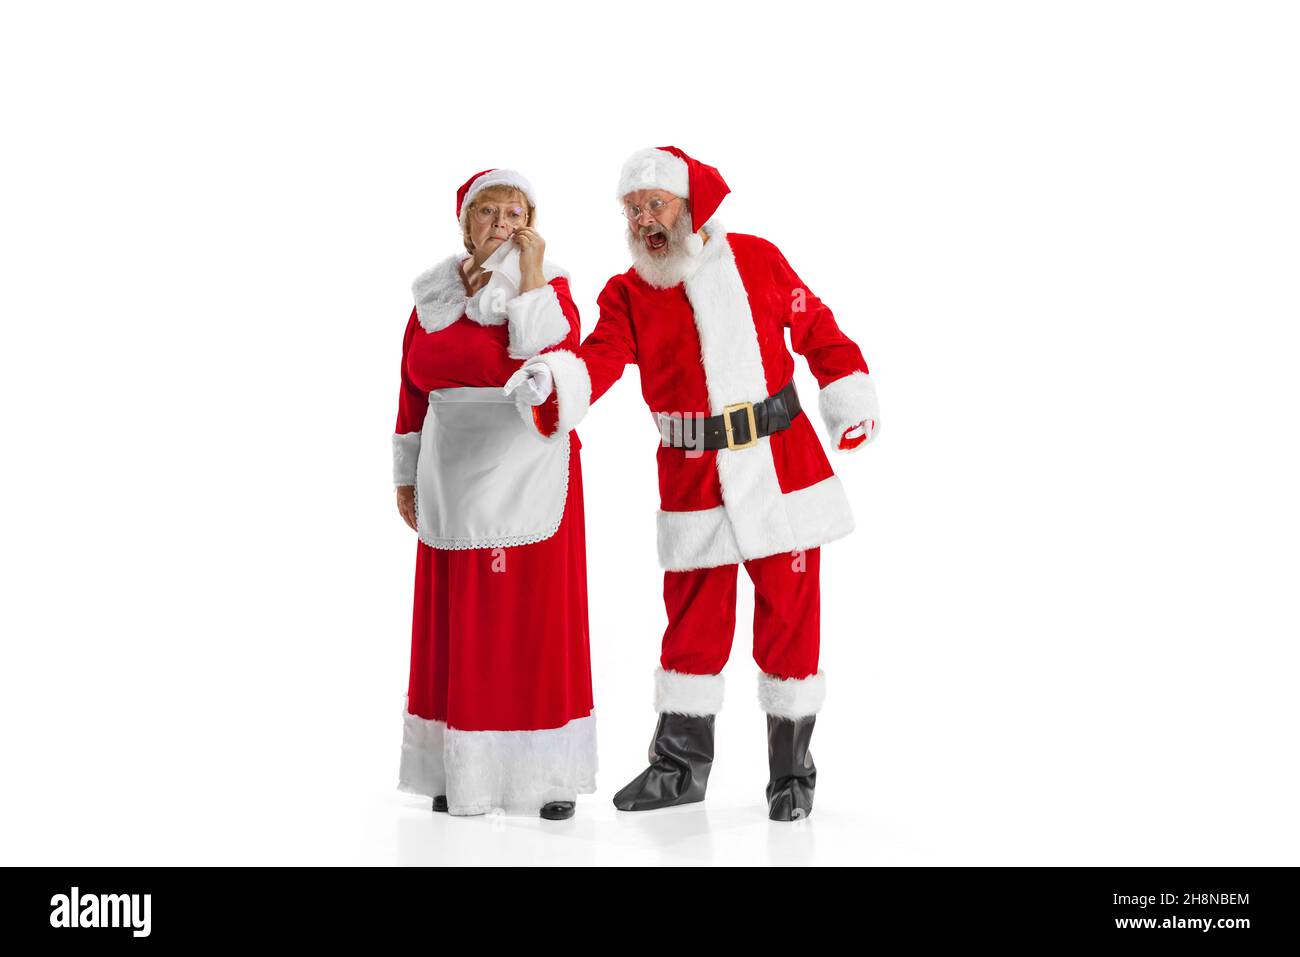 Portrait of two people, man in Santa Claus costume and crying woman, missis Claus isolated on white background. Stock Photo